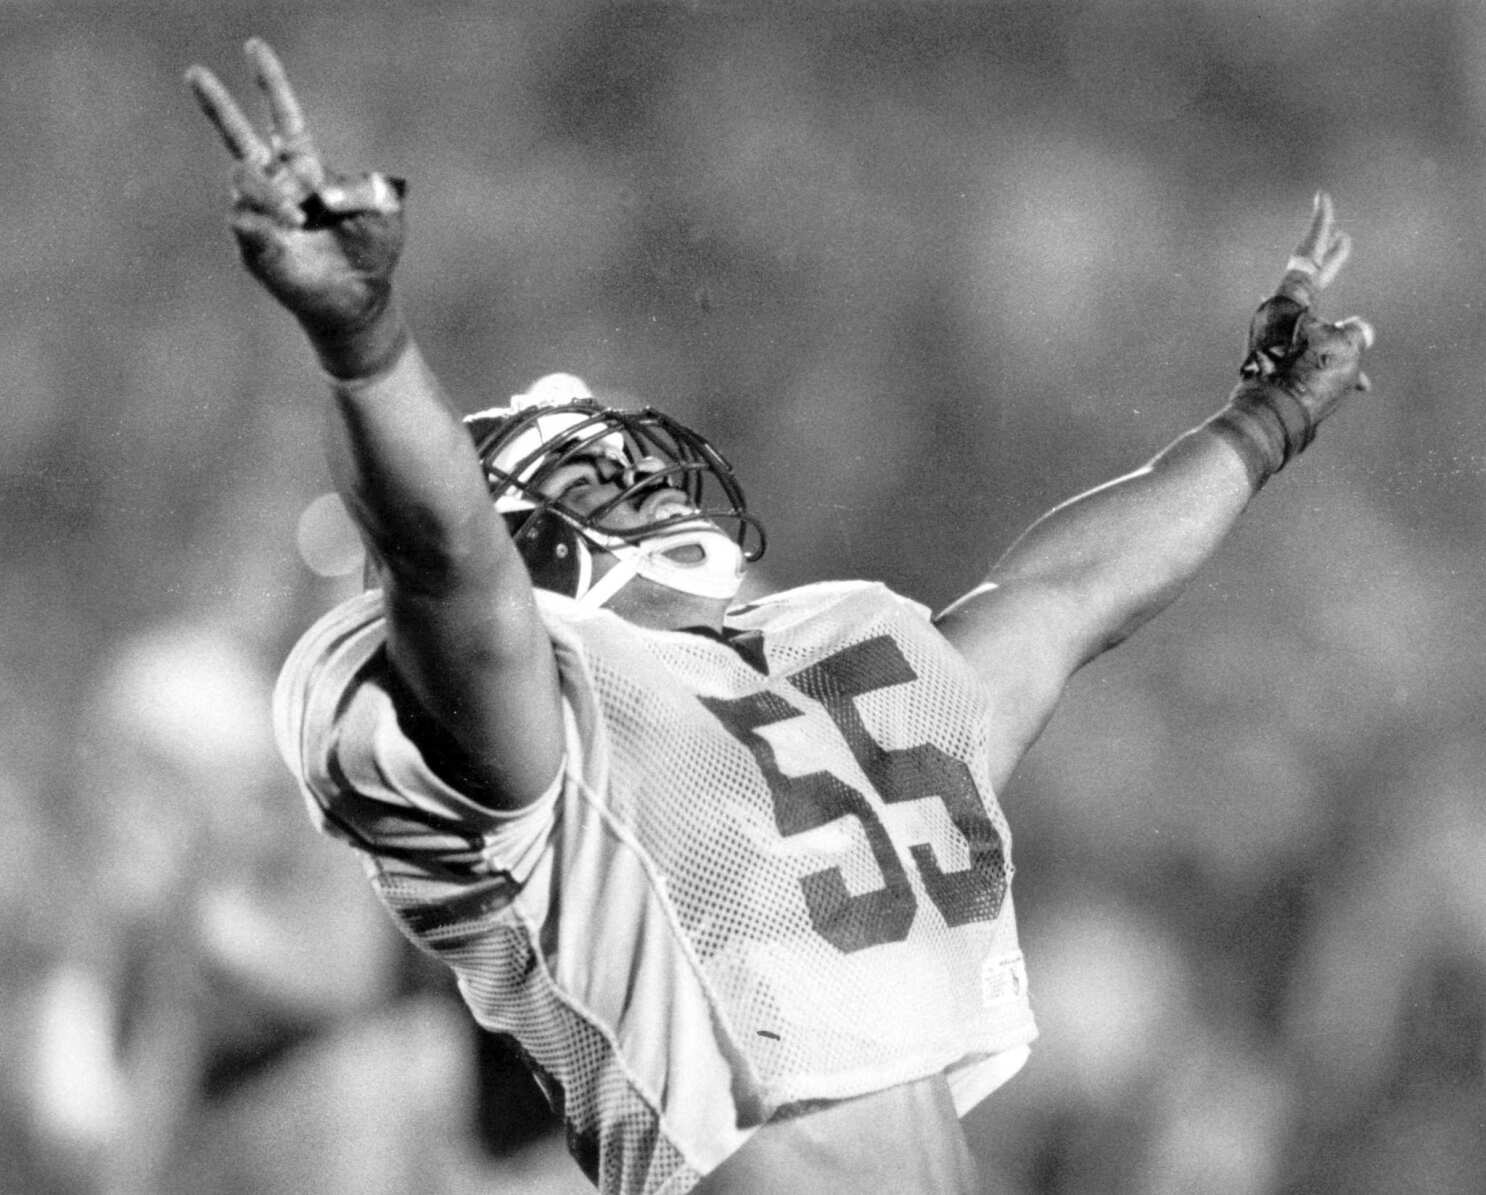 Former Chargers linebacker Junior Seau dies in apparent suicide